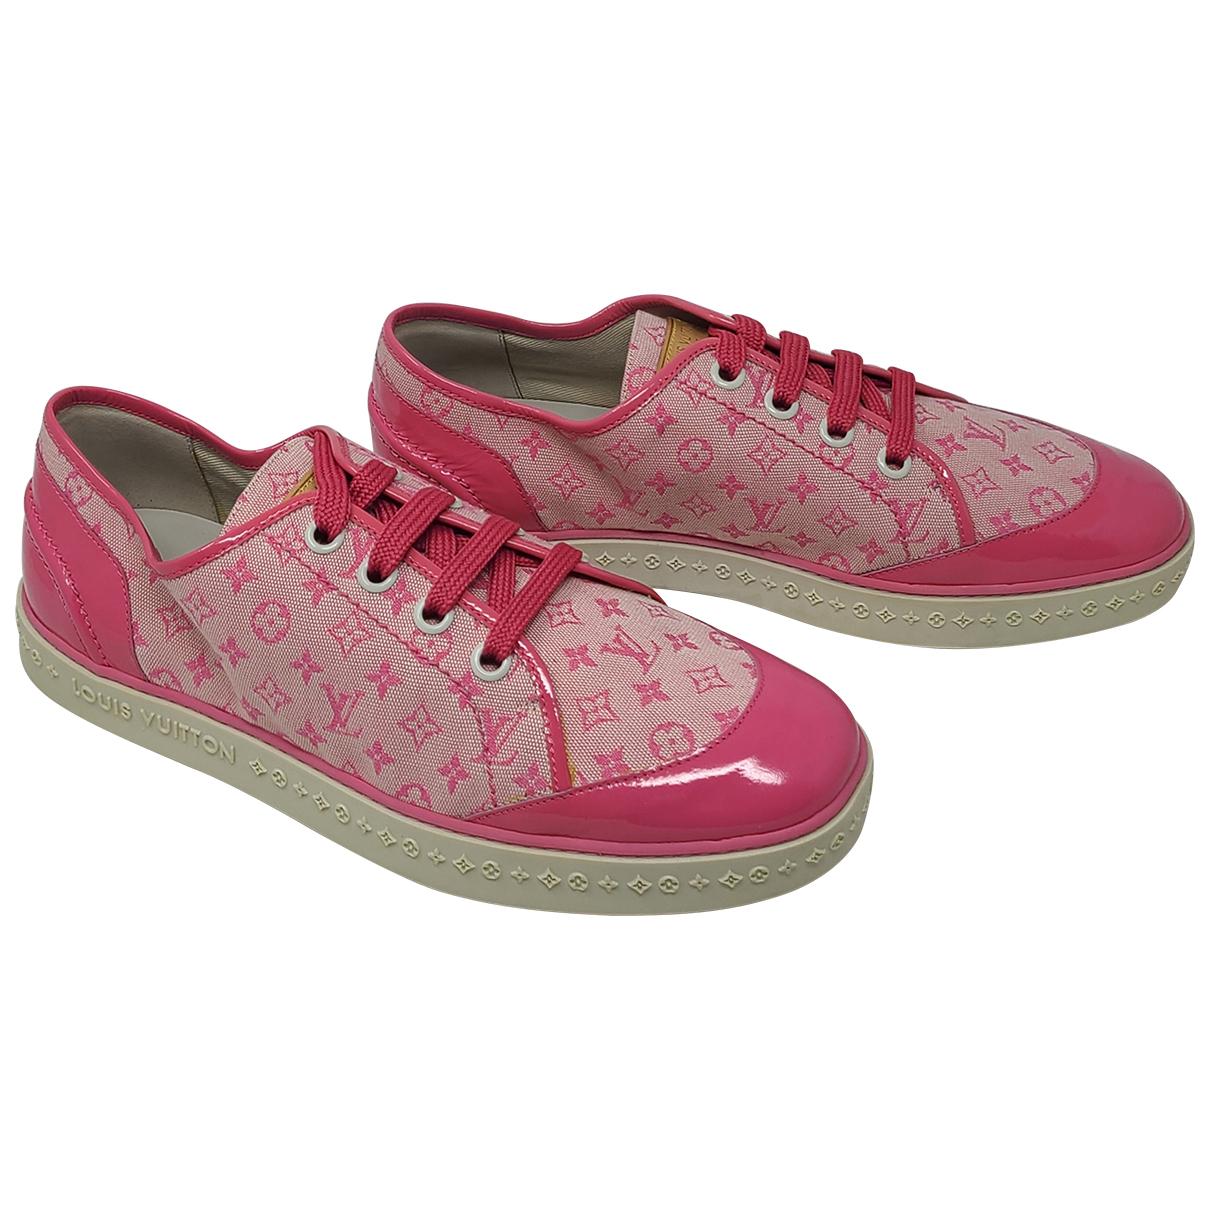 Guarenteed Authentic Louis Vuitton Light Pink Charlie Sneakers